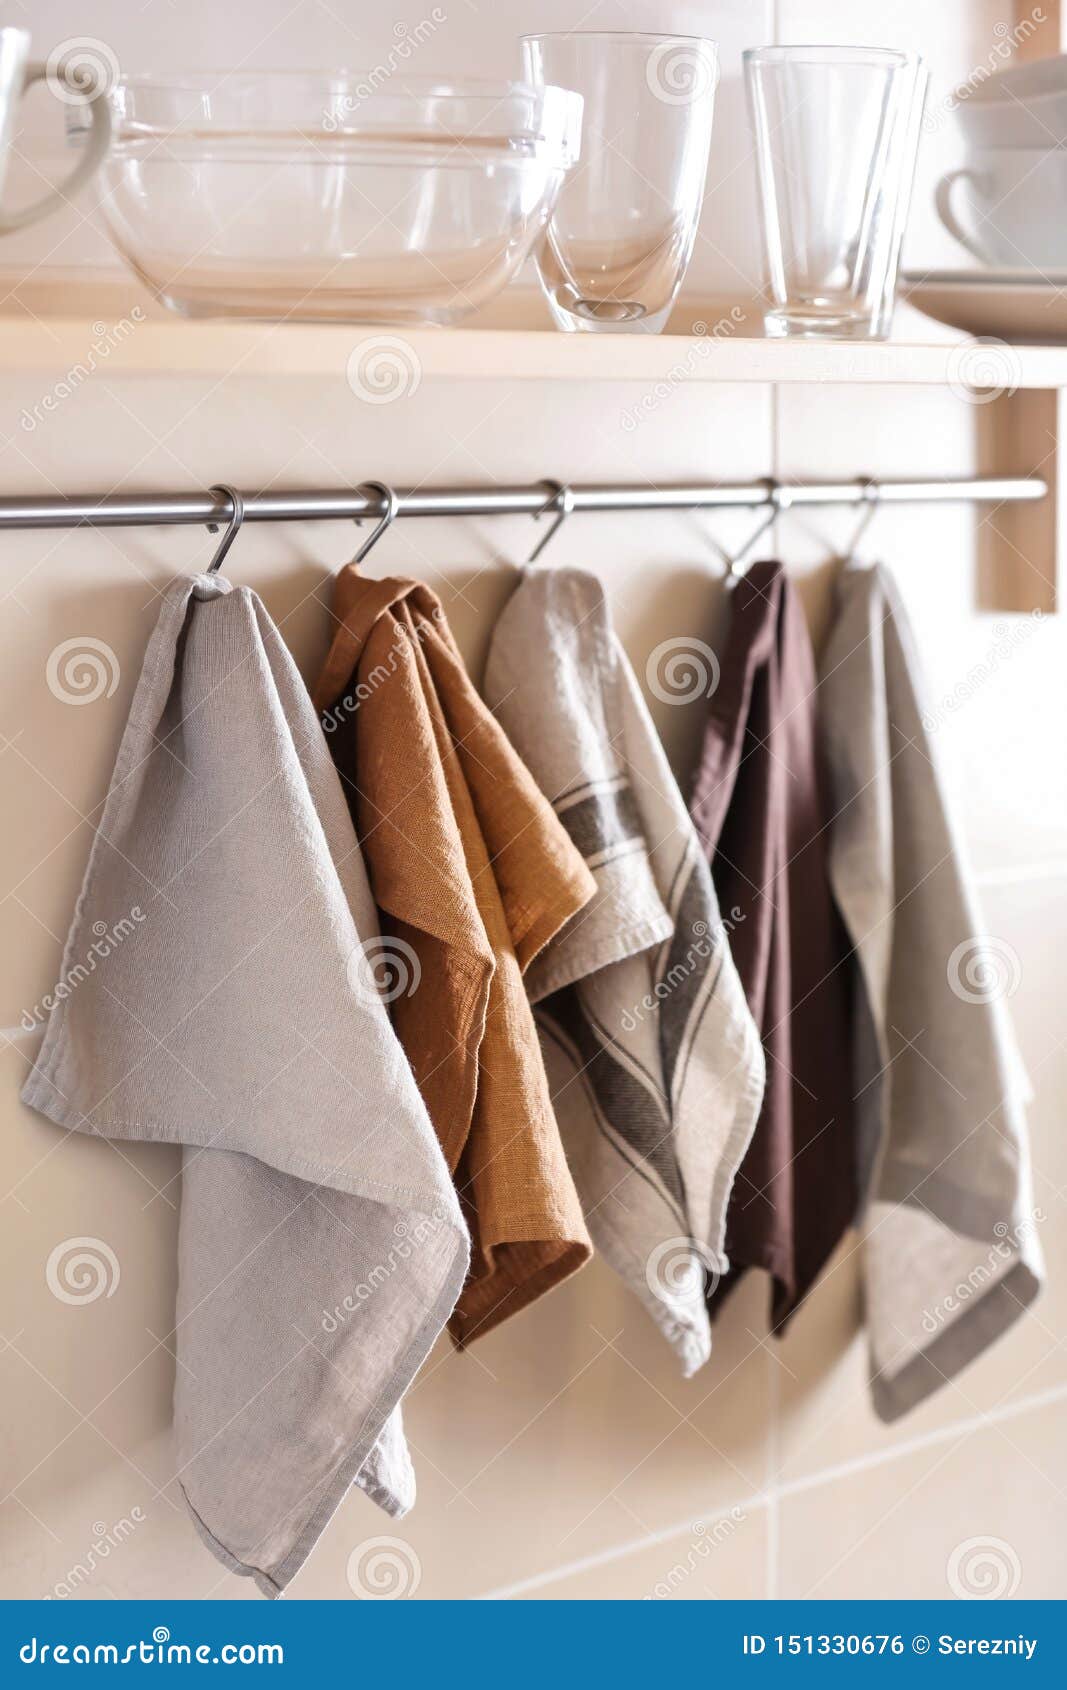 Clean Kitchen Towels Hanging on Rack Stock Photo - Image of cloth, hook:  151330676